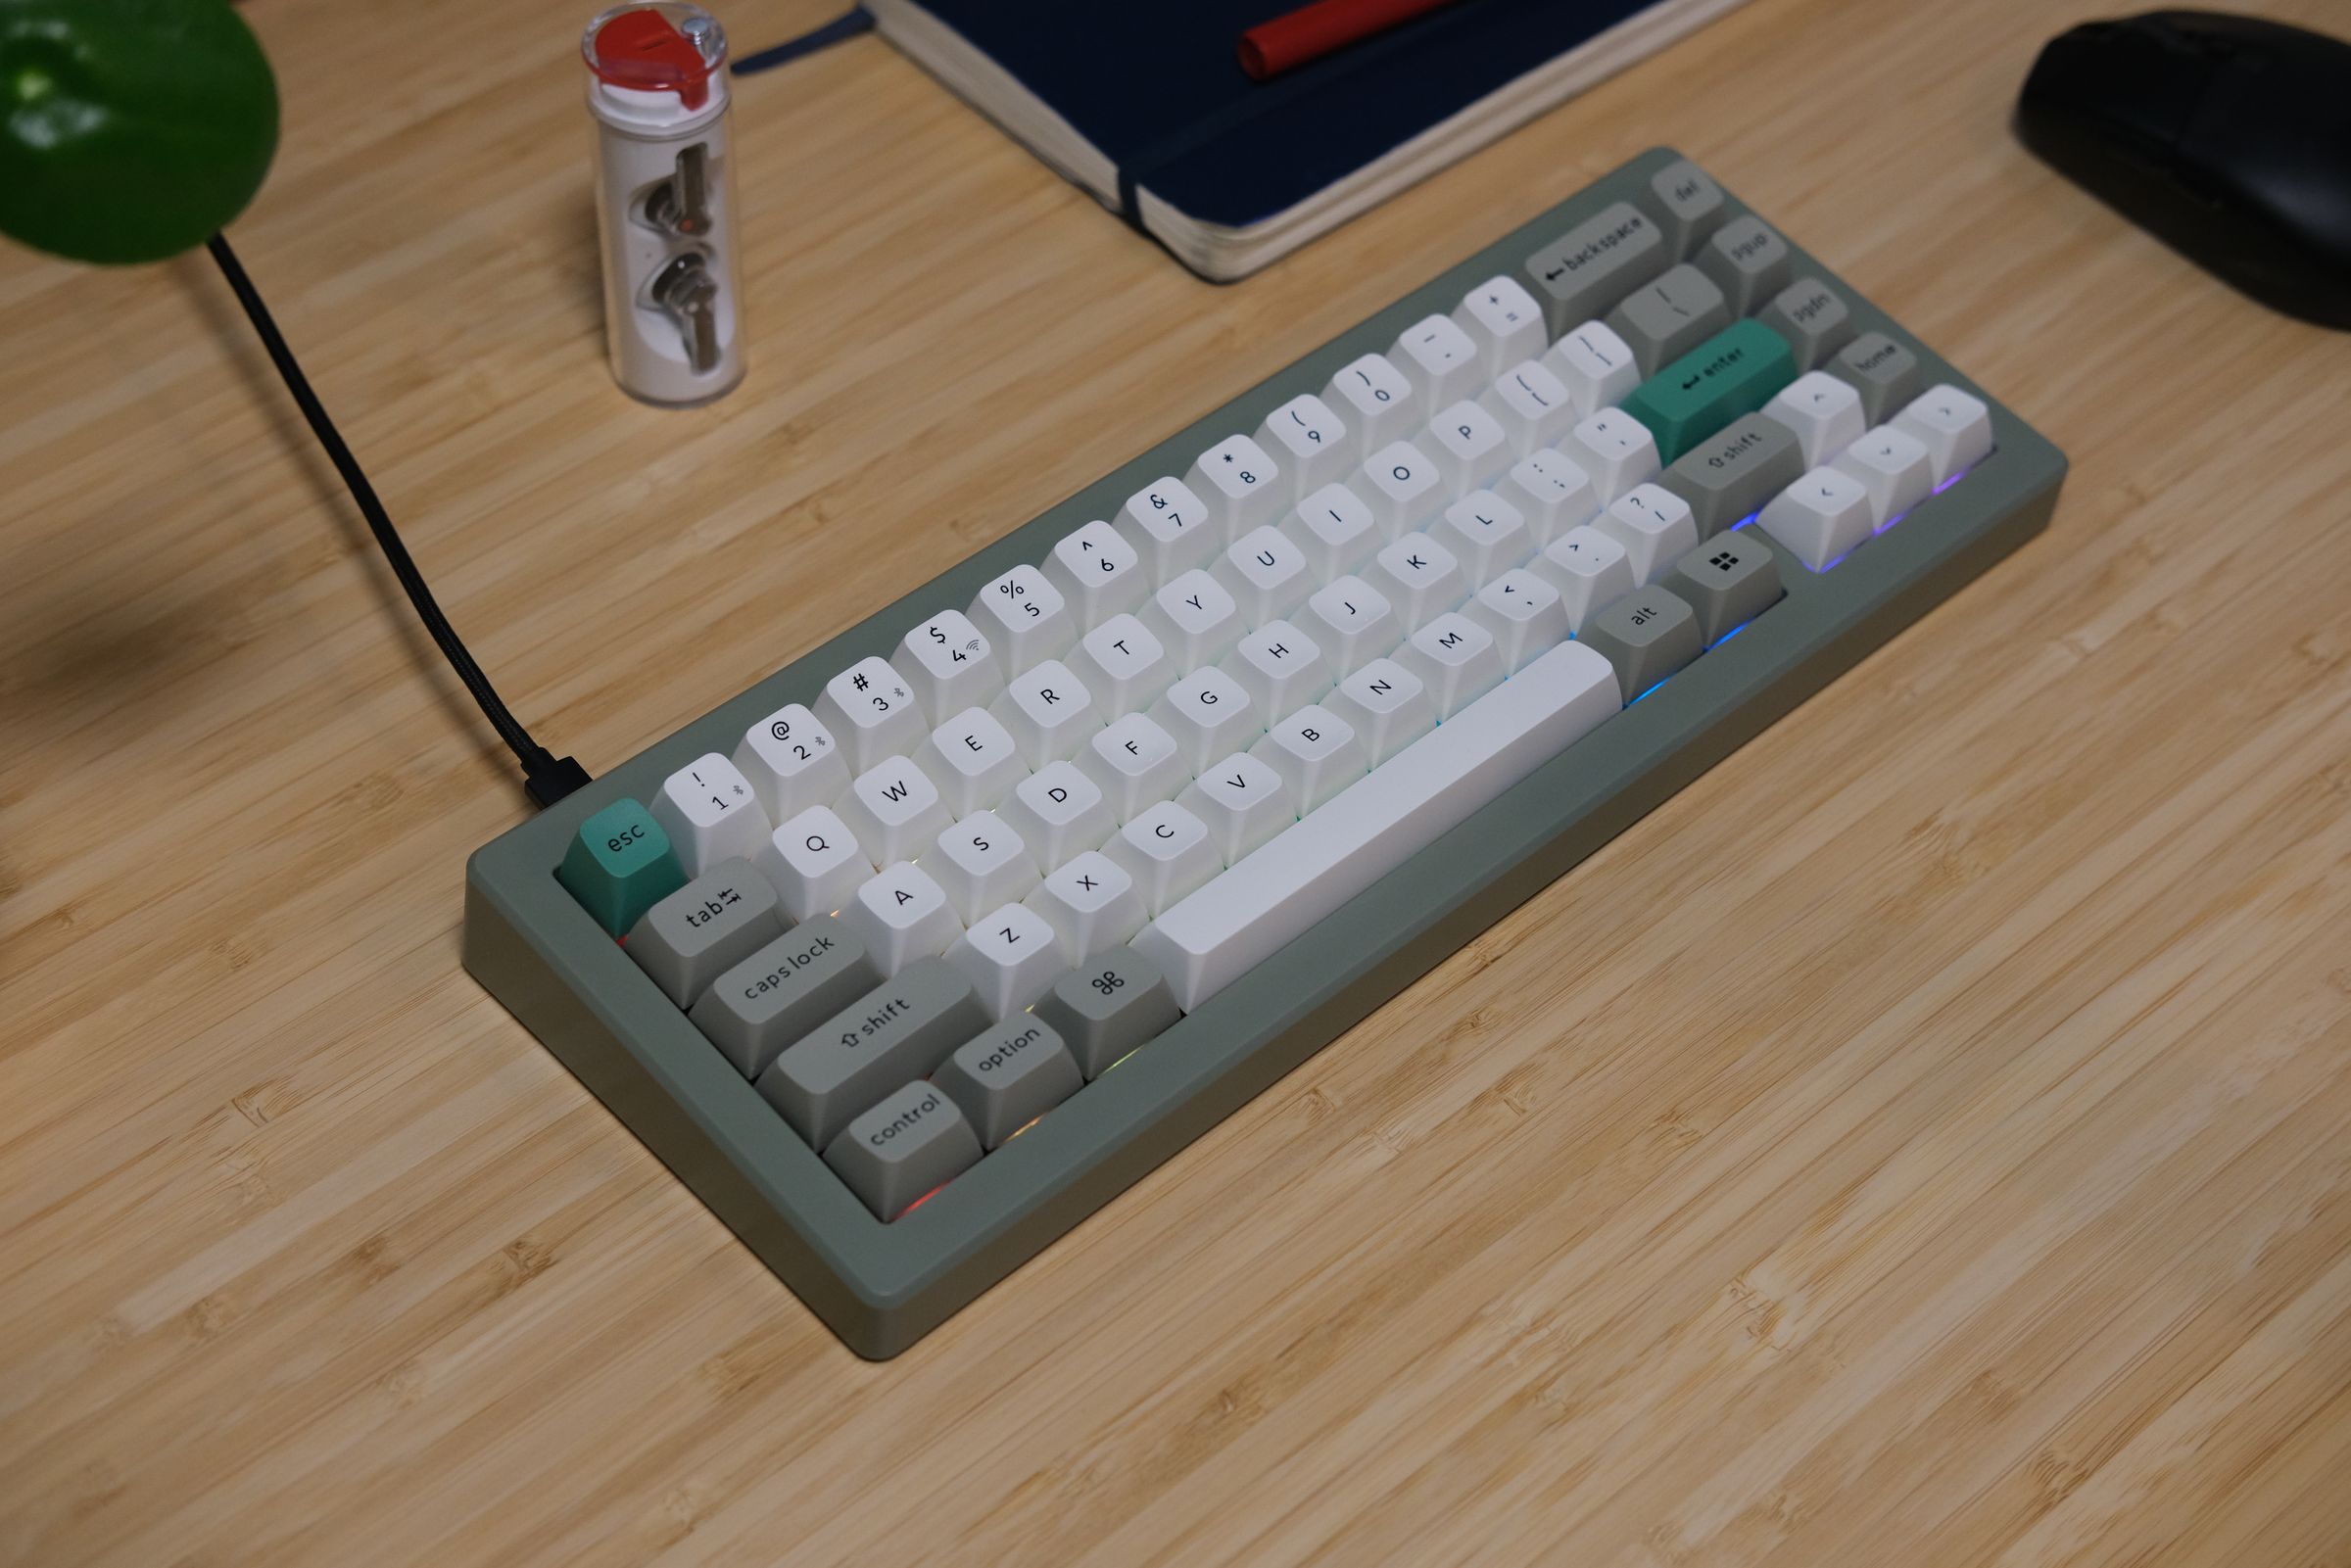 CSTM65 on a desk with white and green keycaps and a green case.